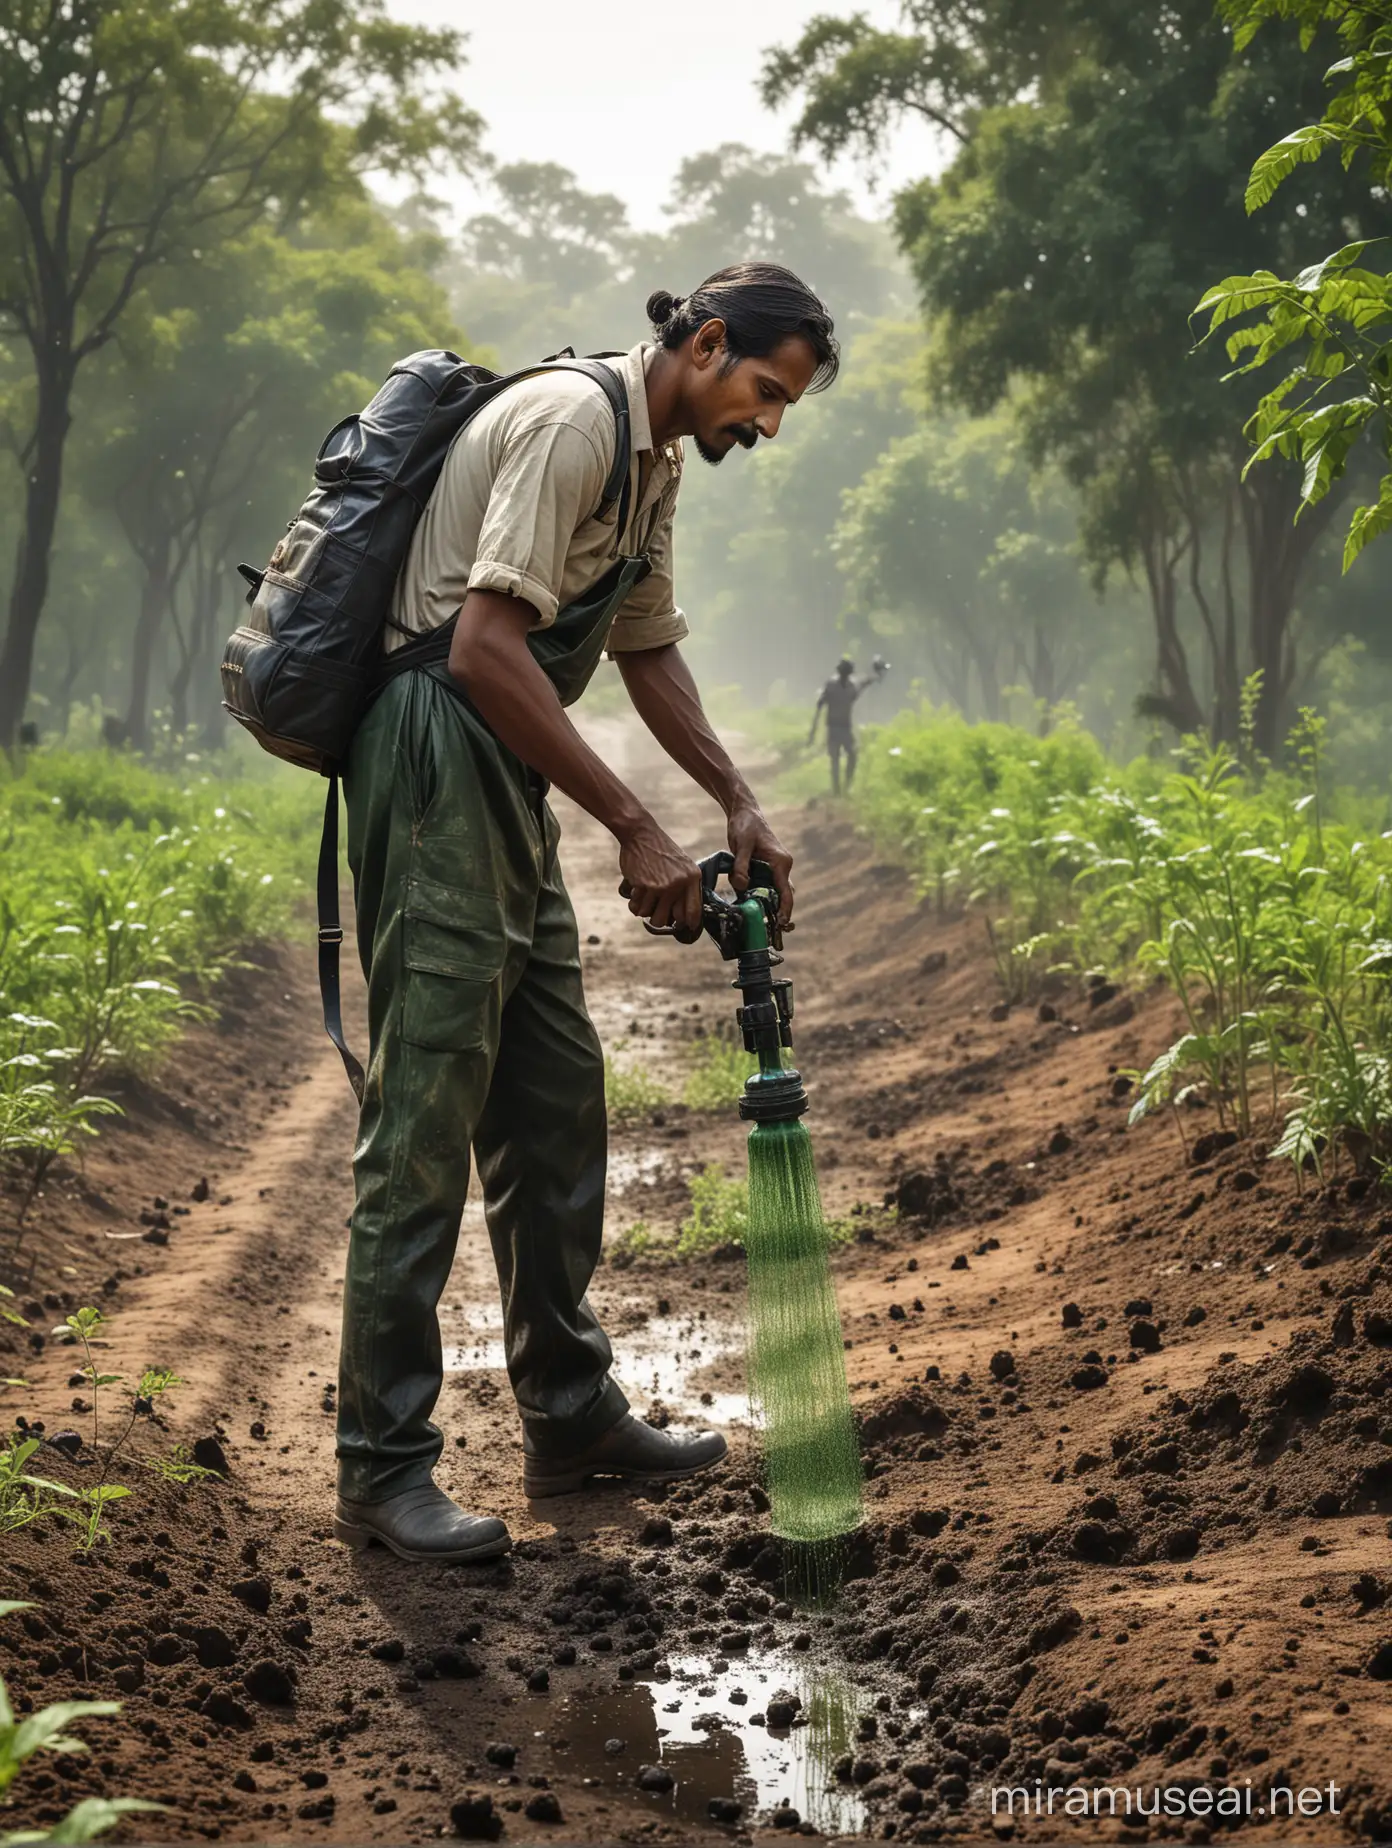 A (((realistic Indian farmer))) meticulously applying a ((knapsack sprayer)) to clean an area of a sticky, tar-like substance to the globe revolving separately at a distance from the farmer, revealing ((vibrant green vegetation)) sprouting up around the earth along continental demarcations, suggesting a (((toxin-free planet))) for a modern magazine cover conceptualizing sustainability